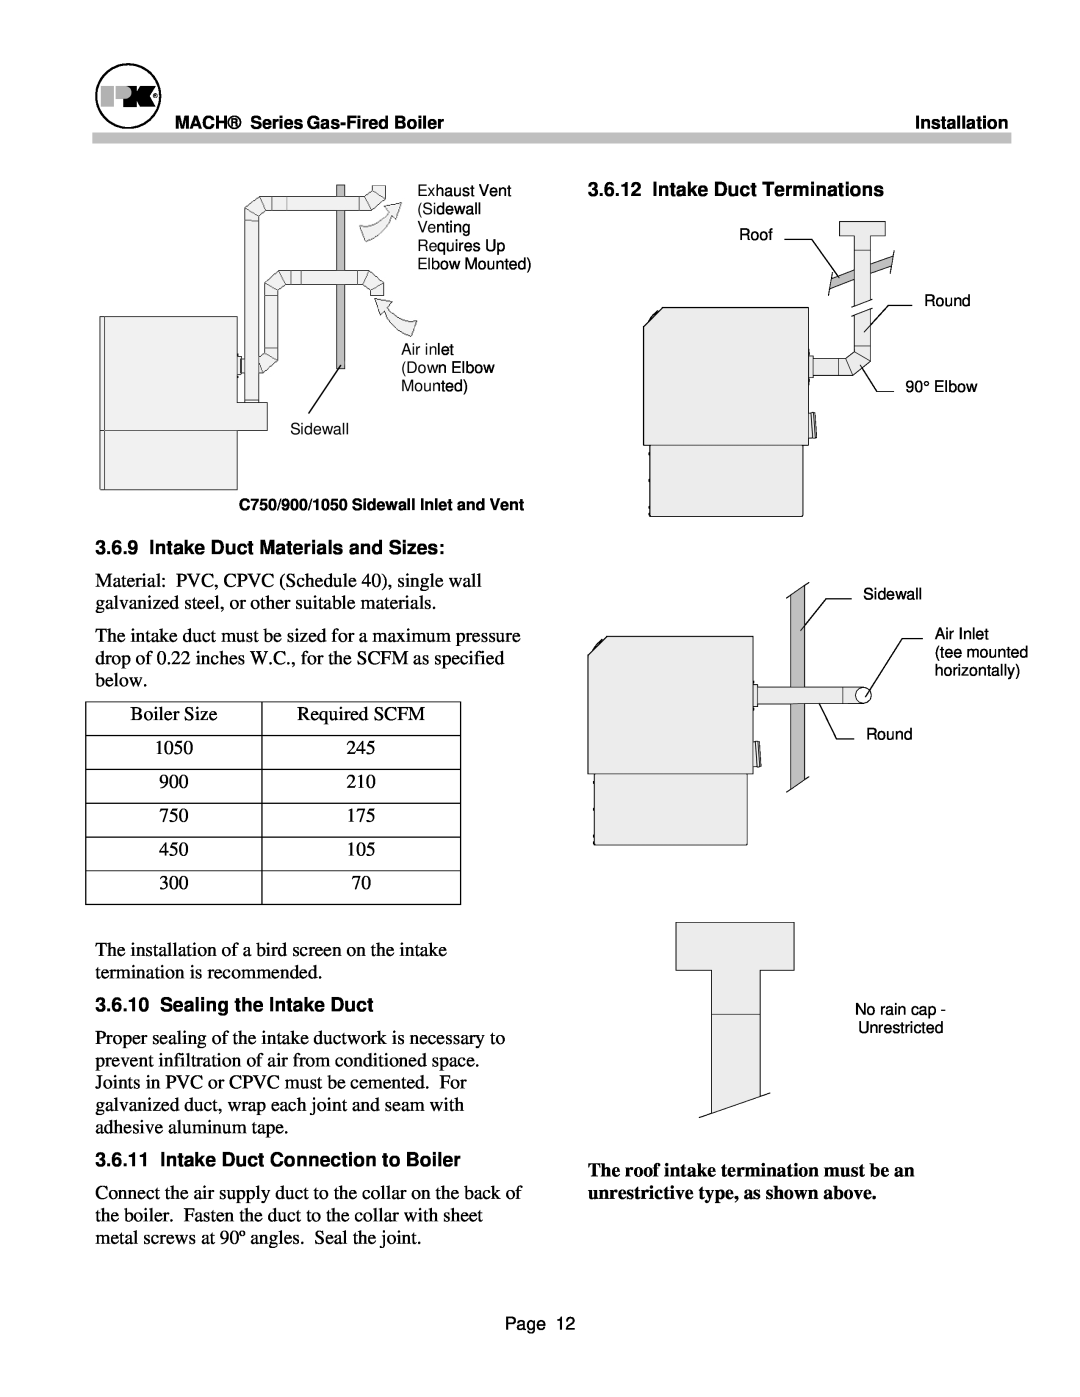 Patterson-Kelley MACH-05 manual Intake Duct Terminations, Intake Duct Materials and Sizes, Sealing the Intake Duct 